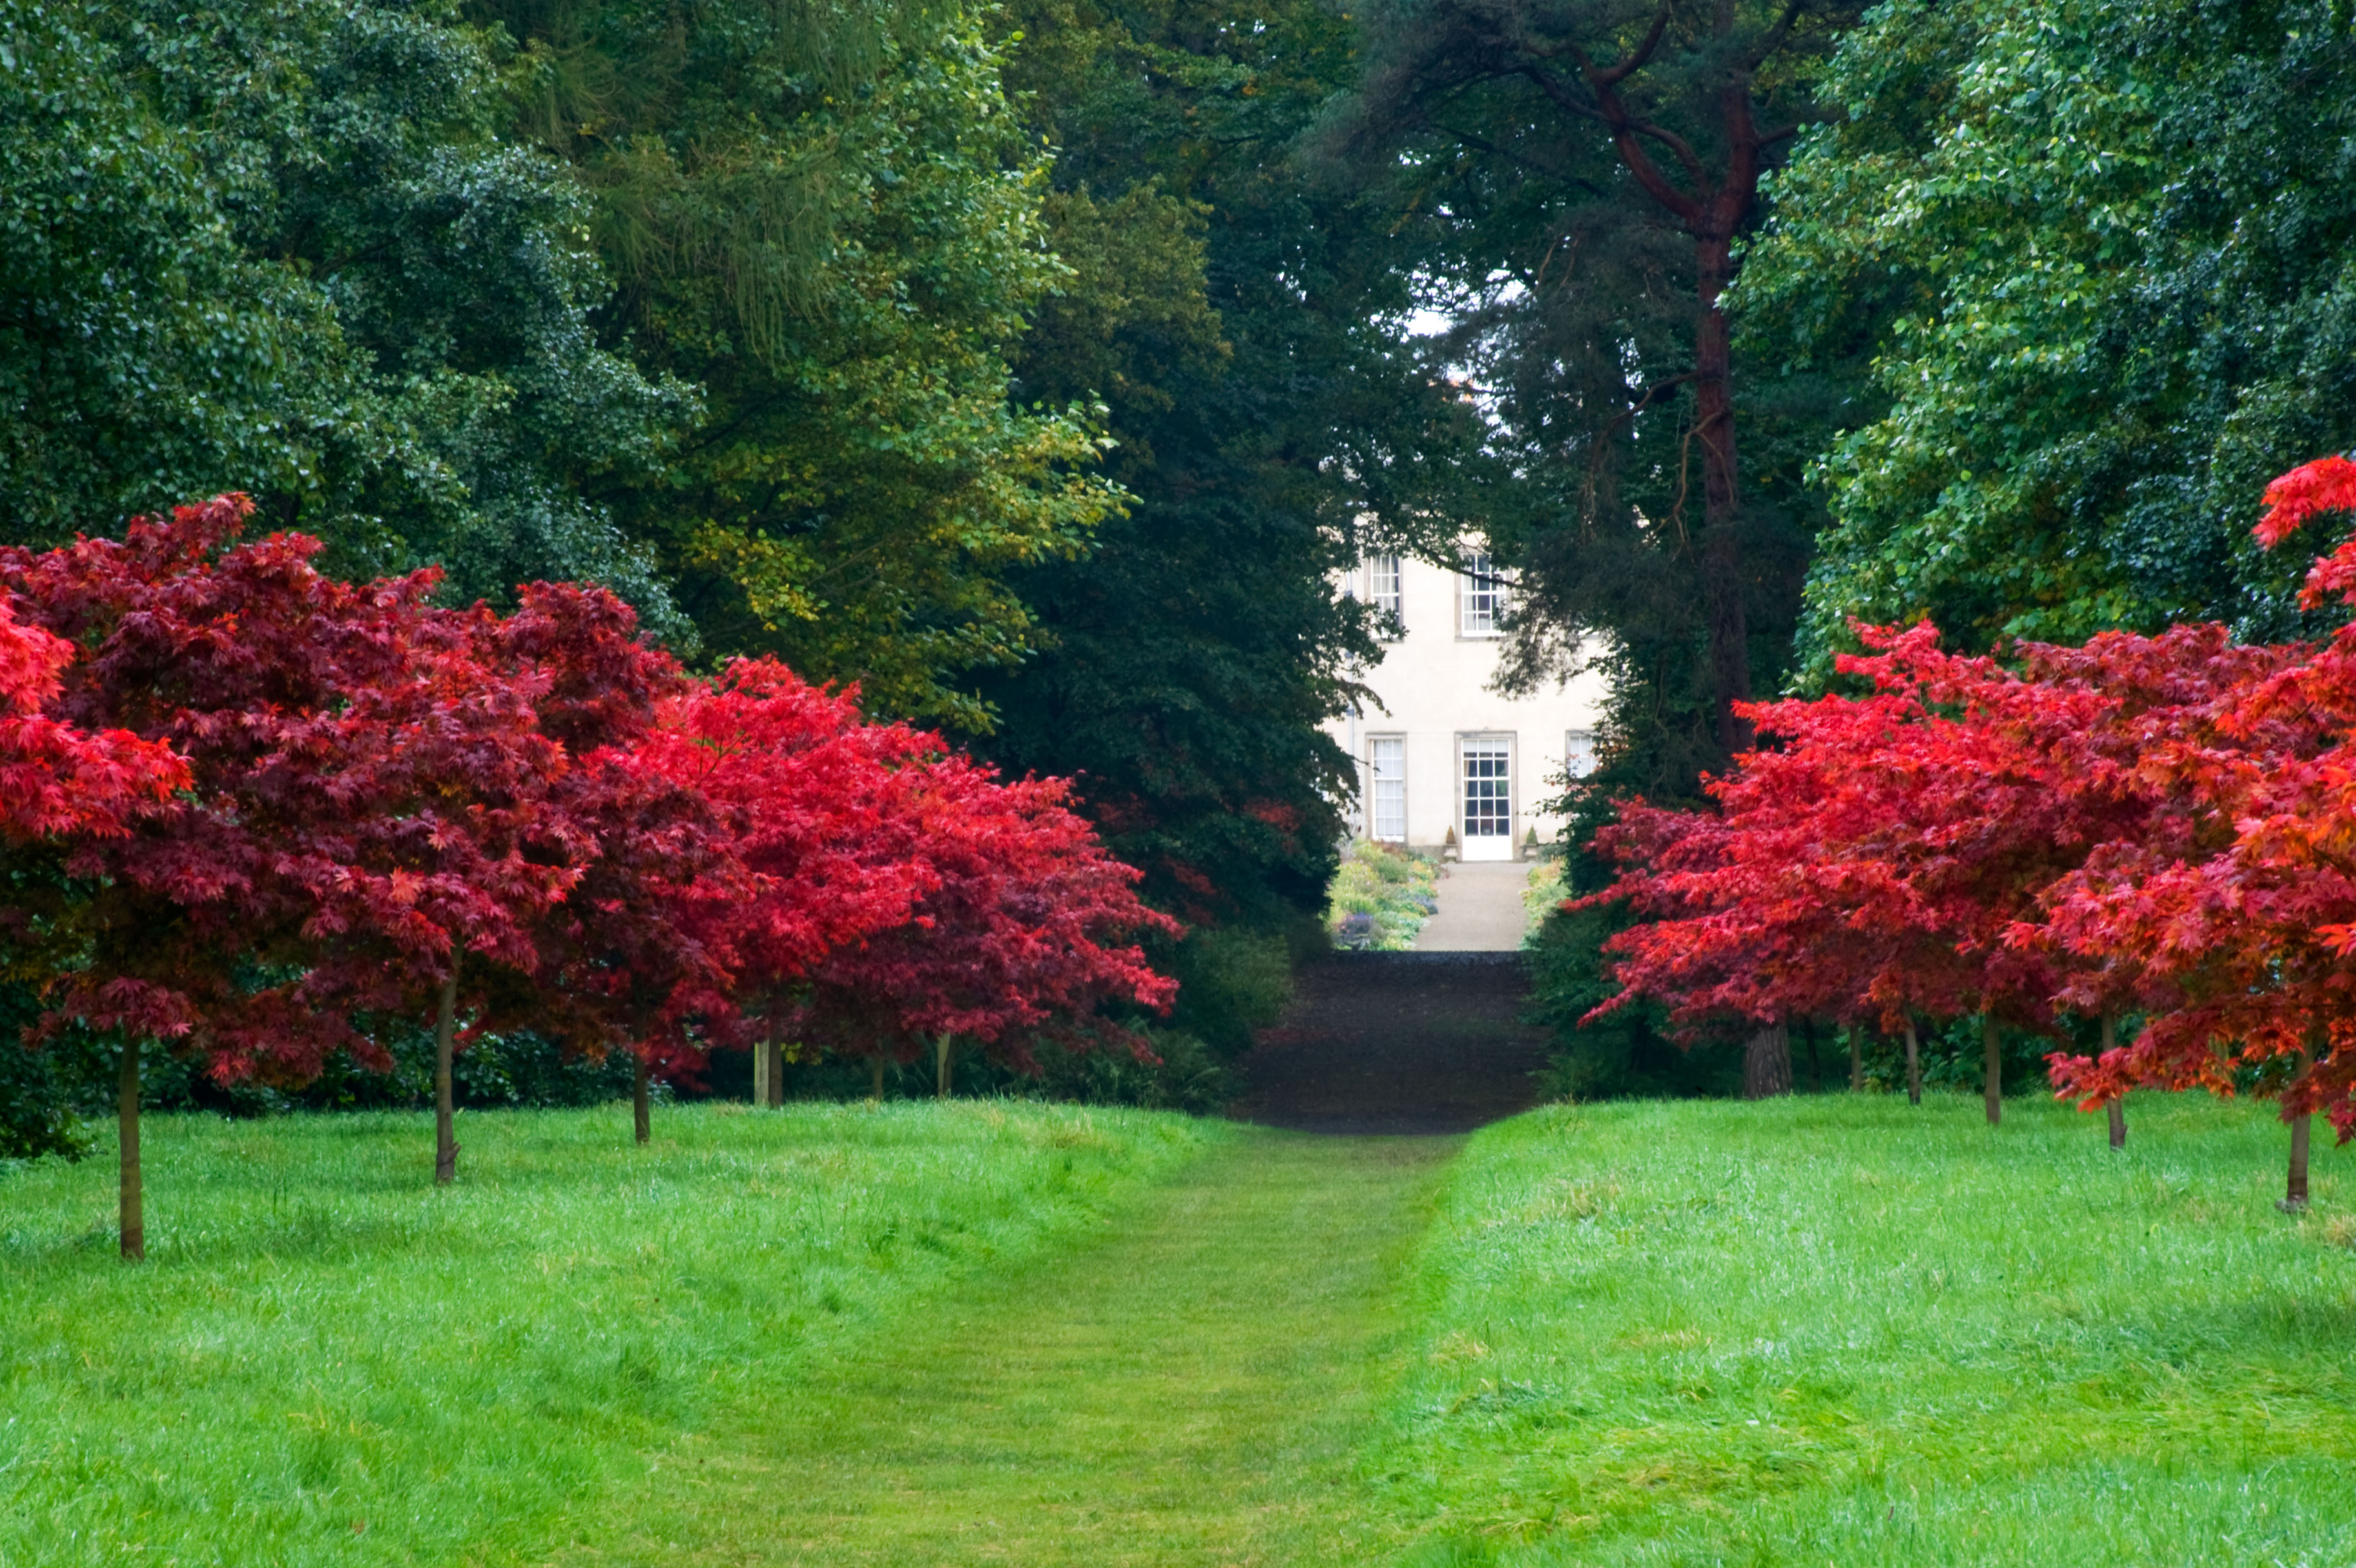 Brilliant acers in Main Avenue at Thorp Perrow (Marcus Harpur/Thorp Perrow/PA)